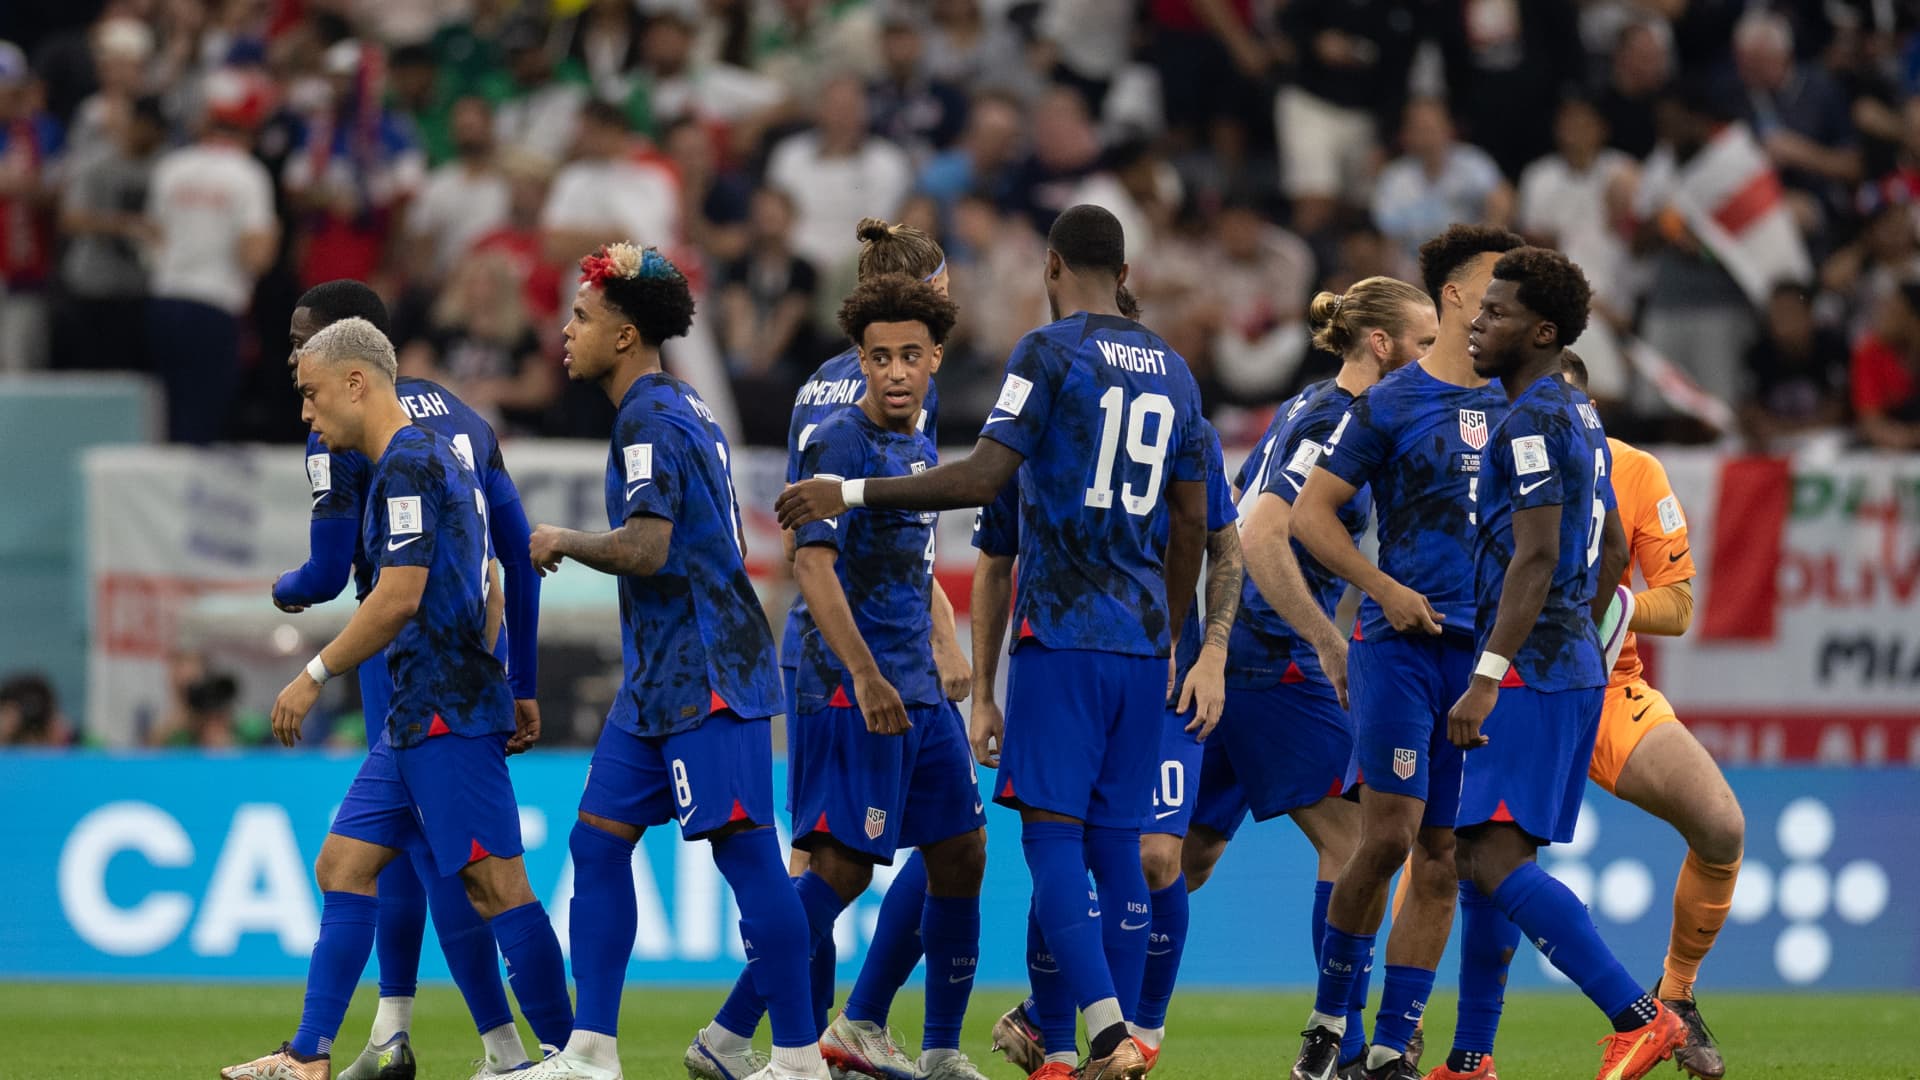 USA leave a team huddle led by Tyler Adams of USA during the FIFA World Cup Qatar 2022 Group B match between England and USA at Al Bayt Stadium on November 25, 2022 in Al Khor, Qatar.